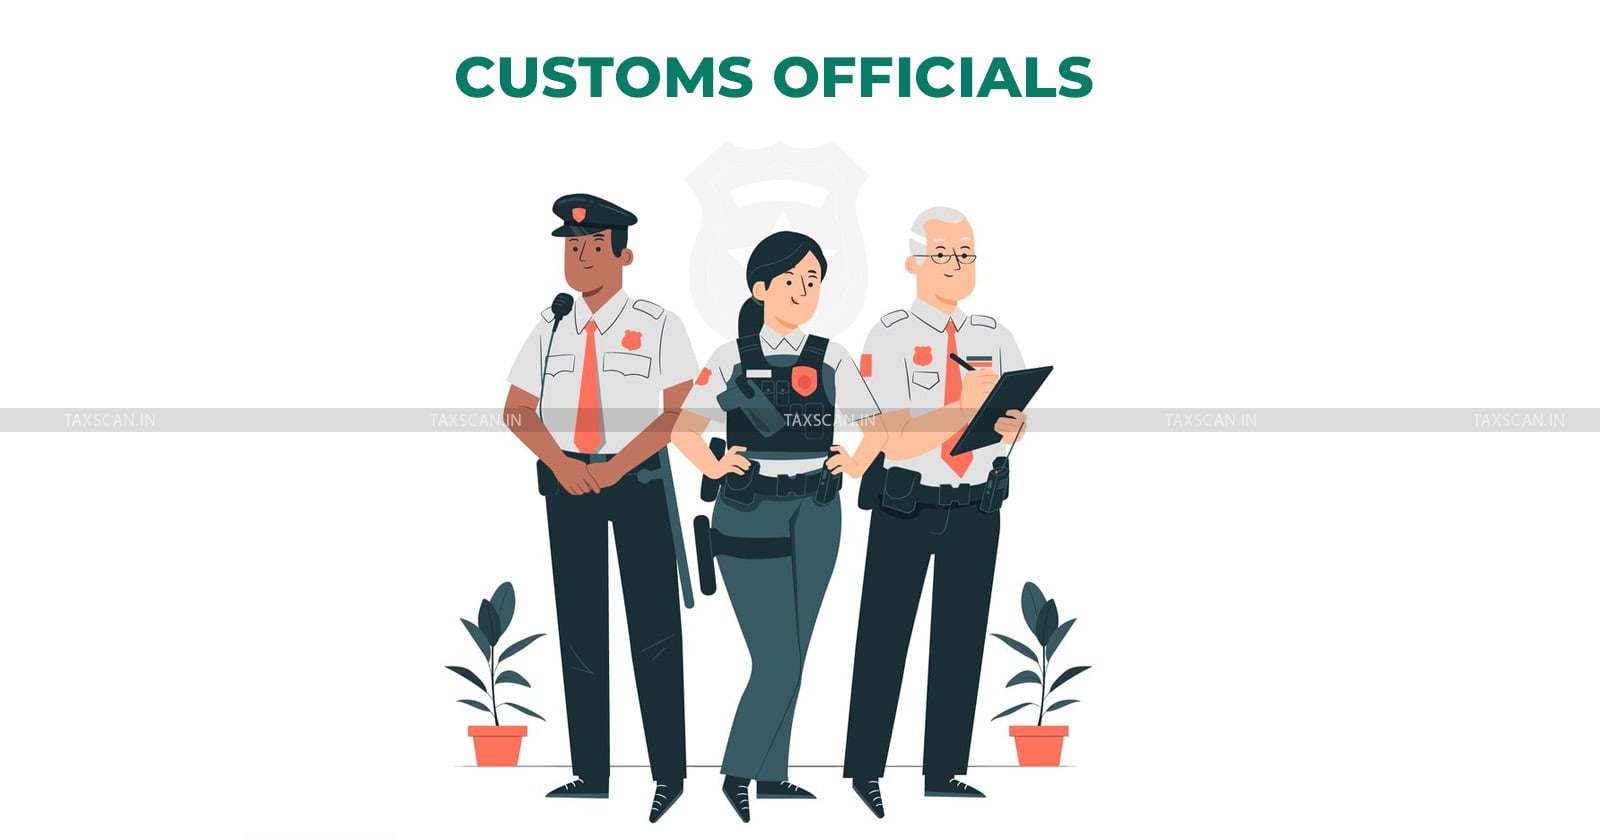 Statement - Customs officials - Not Recorded - Crpc - Substantive Evidence - CESTAT - taxscan